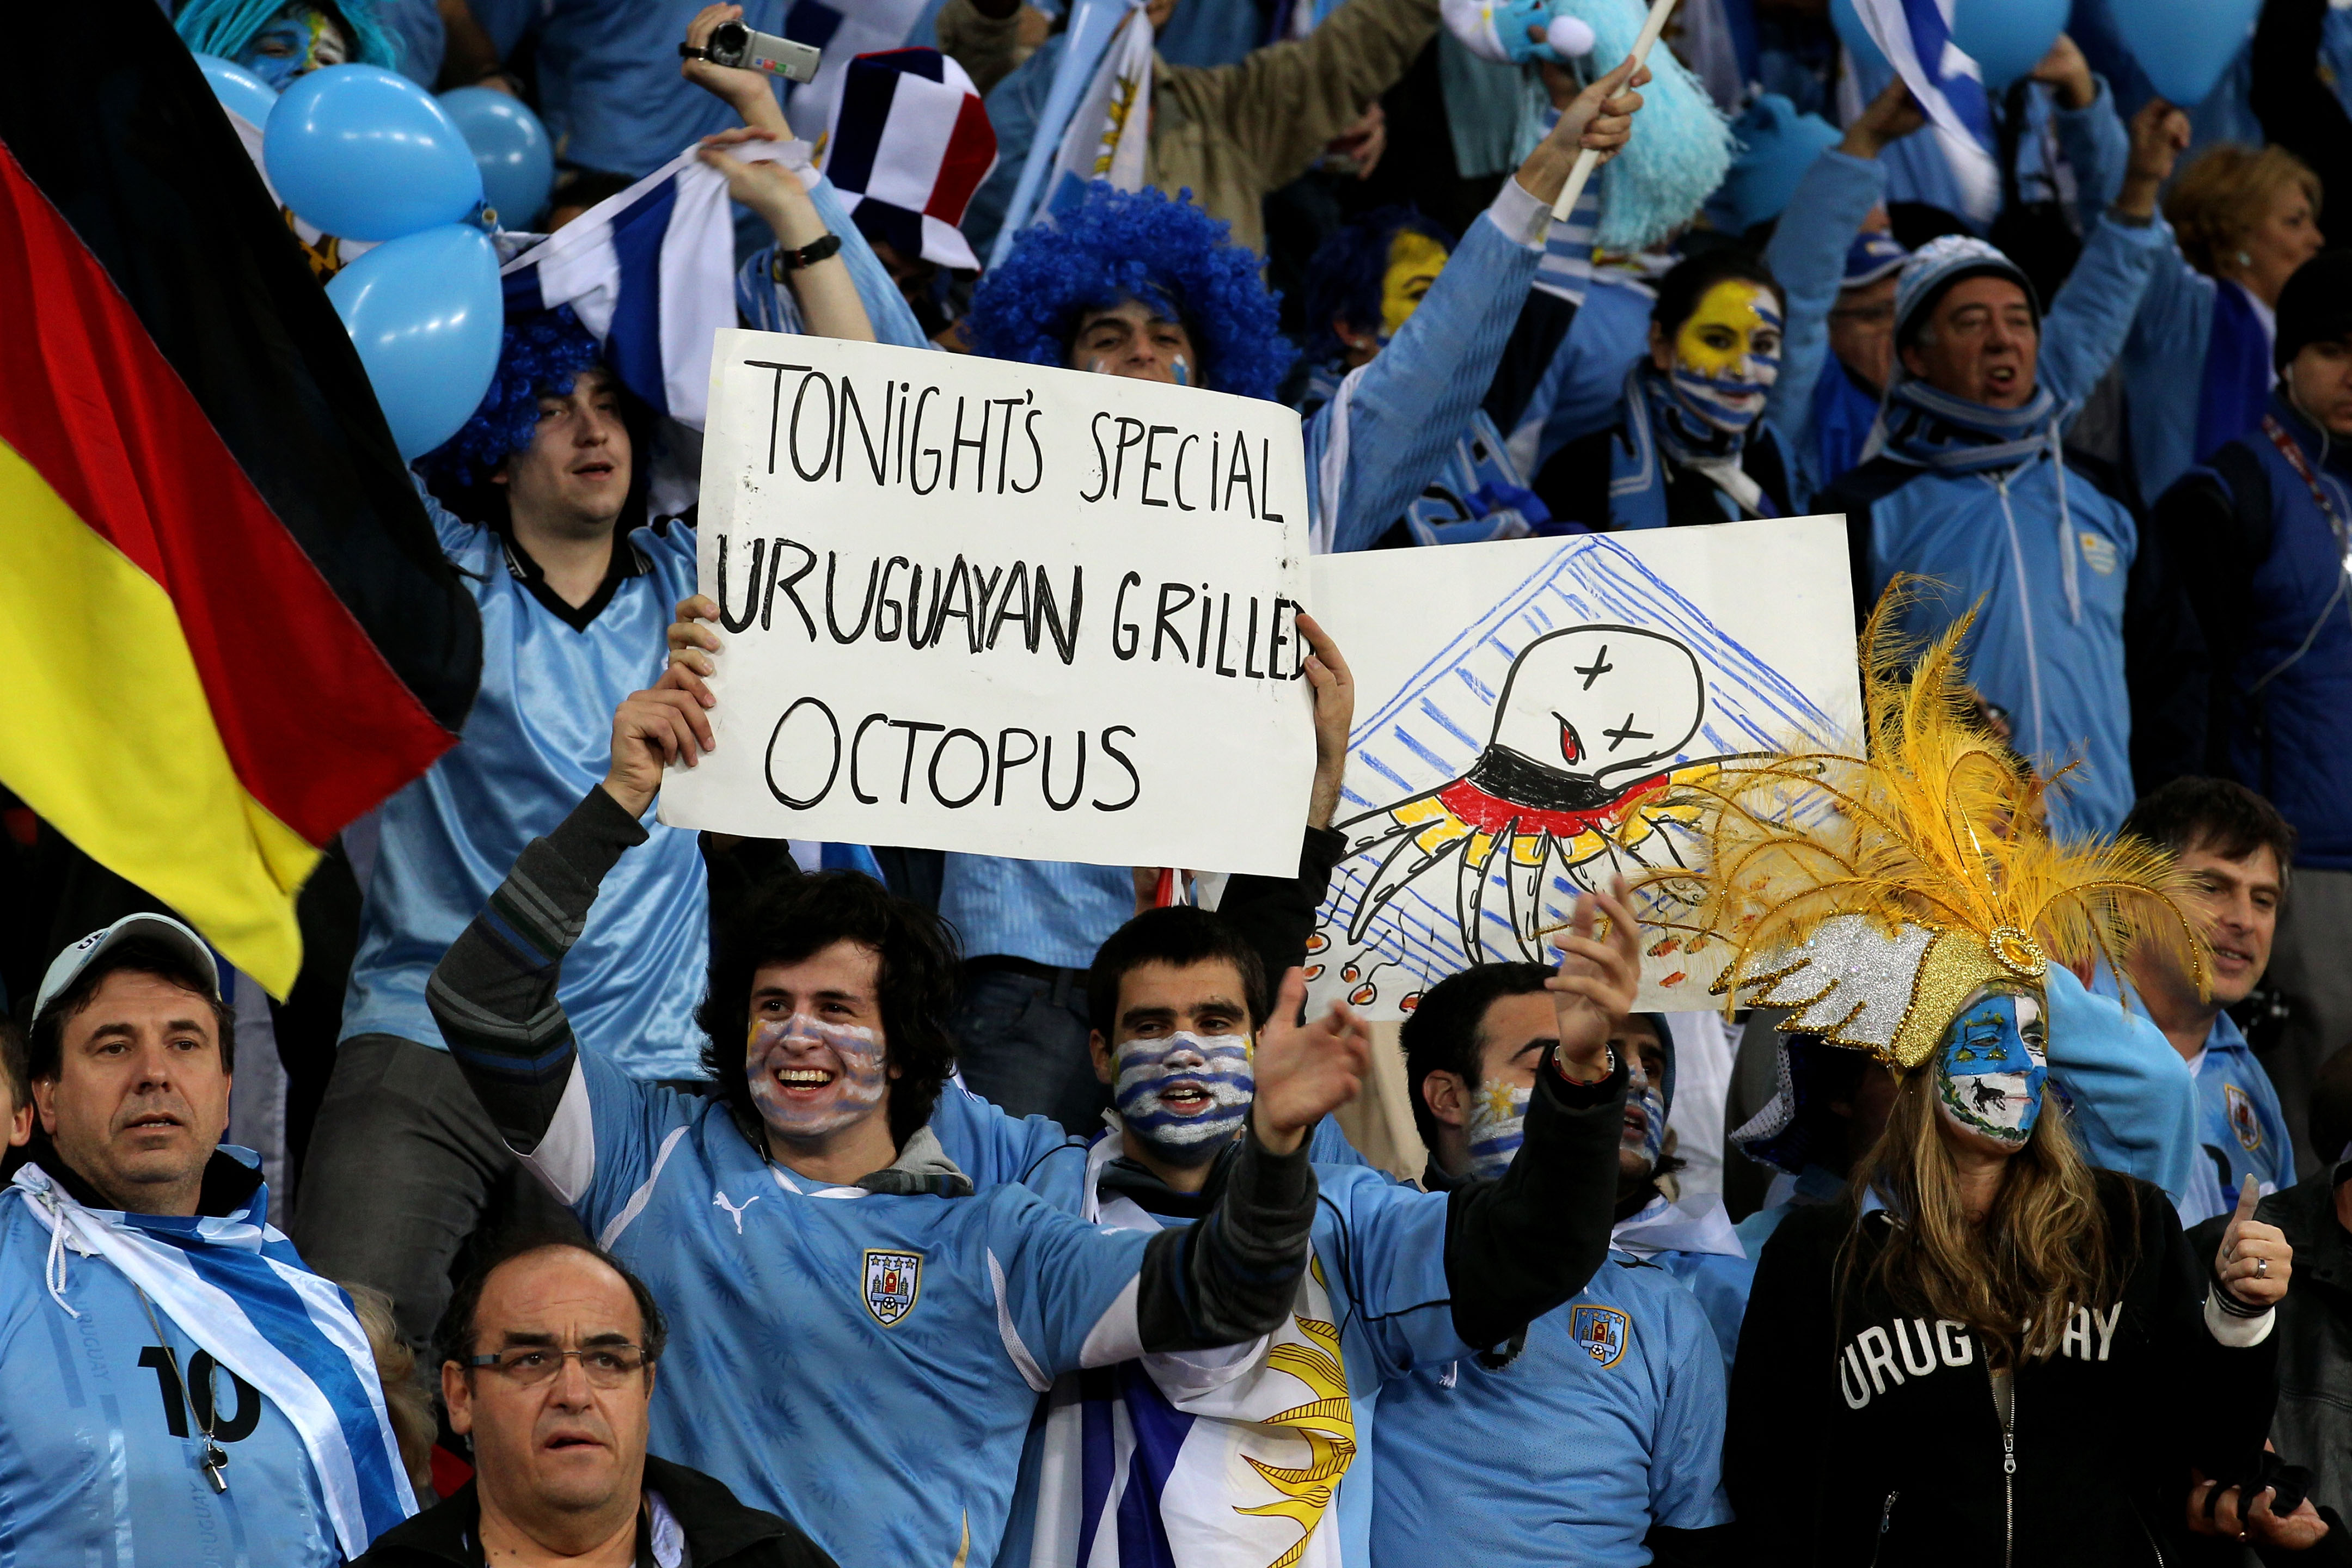 PORT ELIZABETH, SOUTH AFRICA - JULY 10: Uruguay fans enjoy the atmosphere prior to the 2010 FIFA World Cup South Africa Third Place Play-off match between Uruguay and Germany at The Nelson Mandela Bay Stadium on July 10, 2010 in Port Elizabeth, South Afri